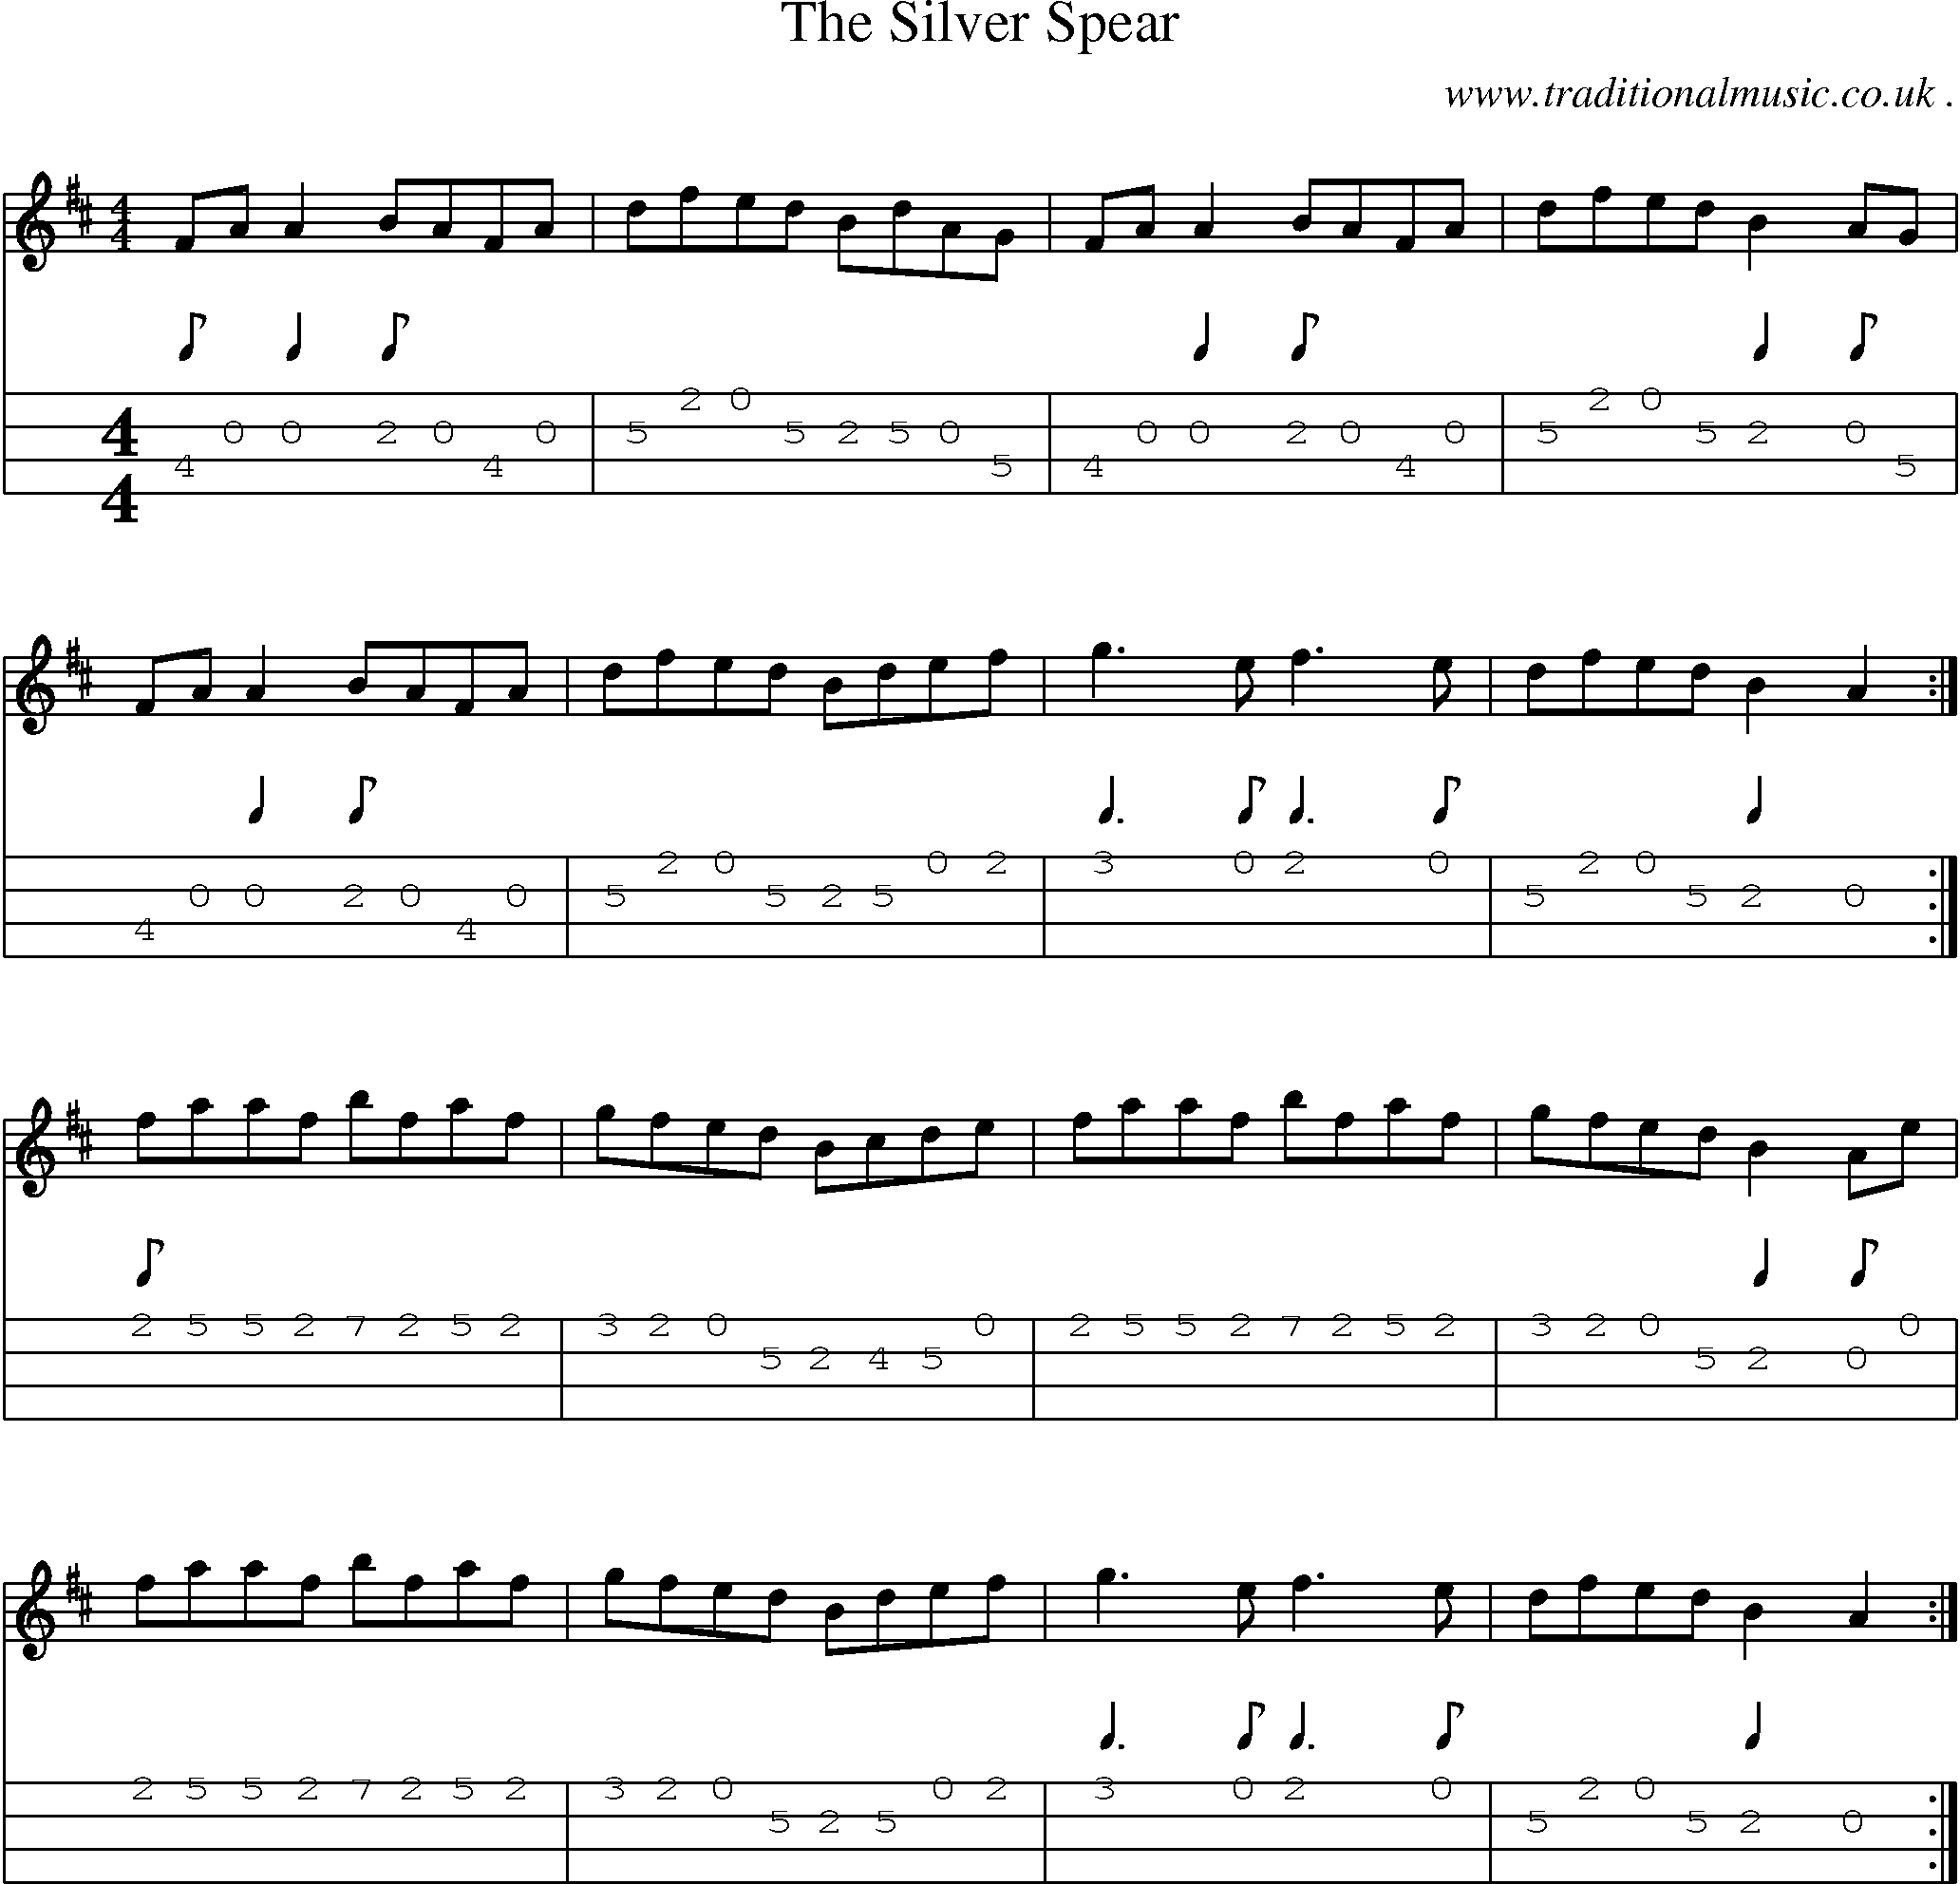 Sheet-Music and Mandolin Tabs for The Silver Spear